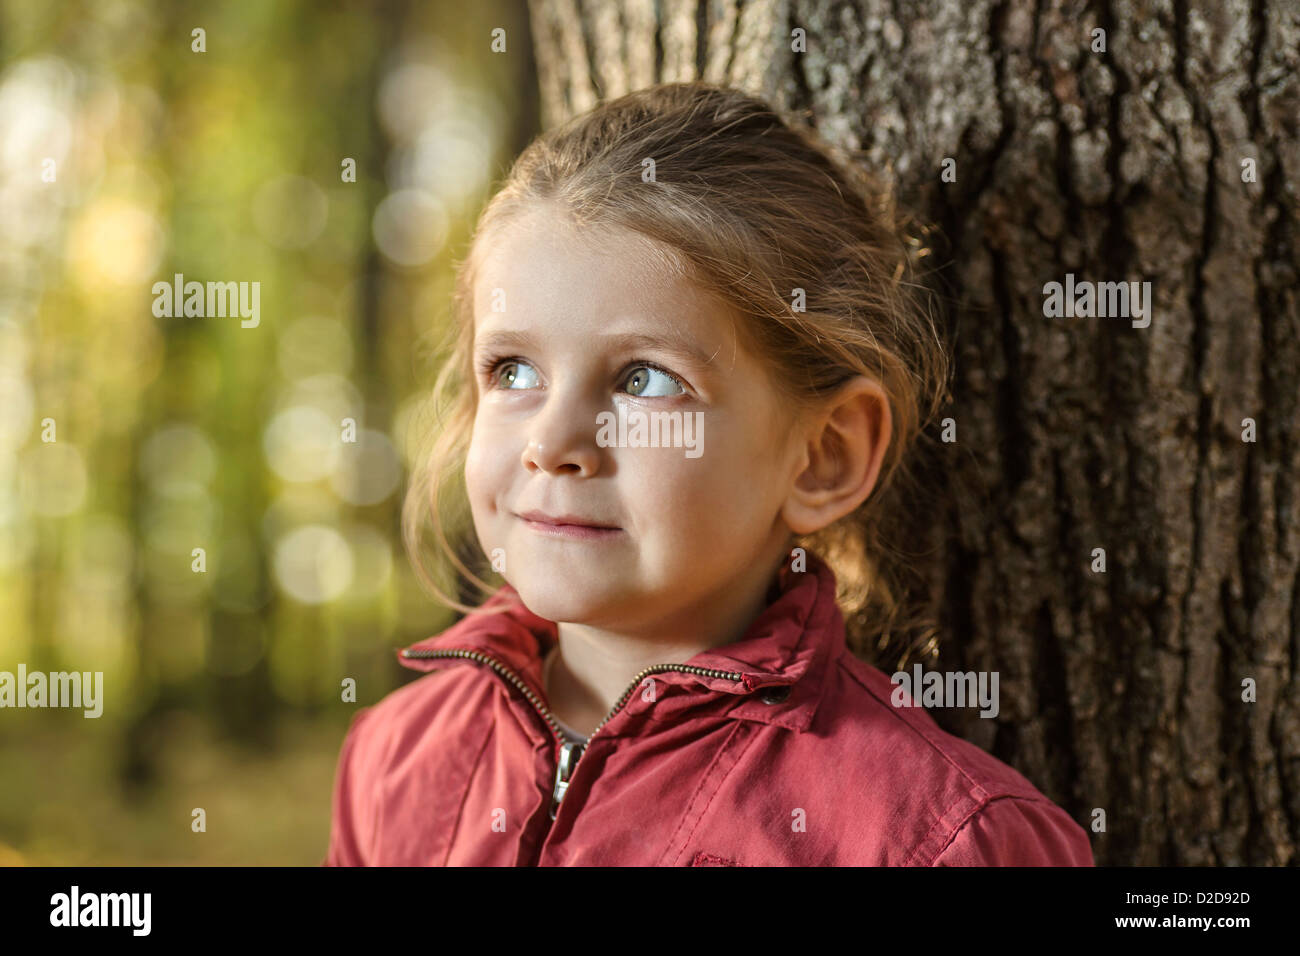 A young girl looking away curiously while leaning against a tree trunk Stock Photo